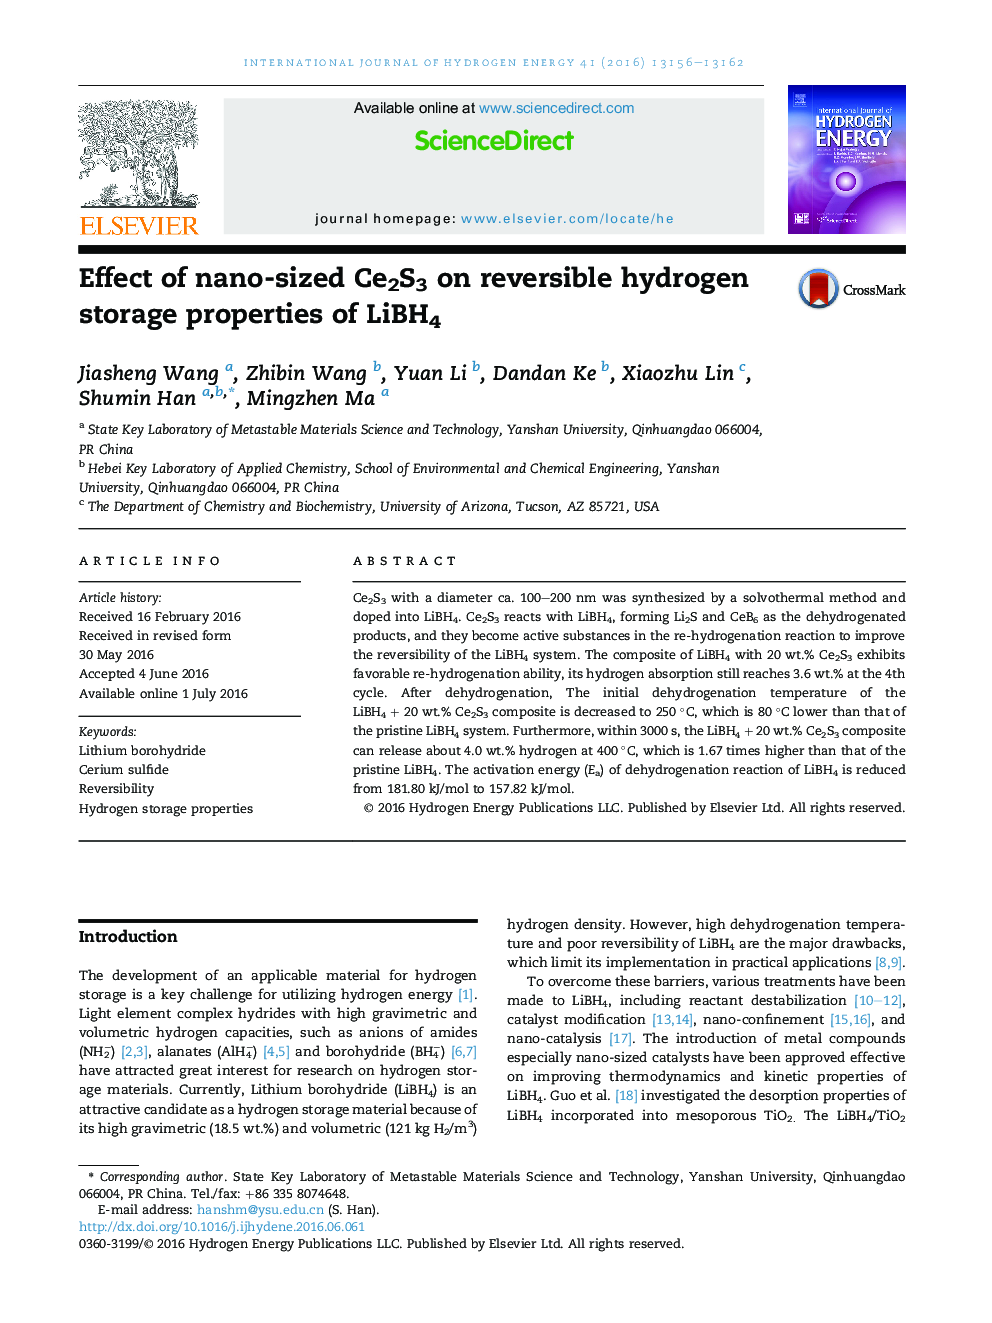 Effect of nano-sized Ce2S3 on reversible hydrogen storage properties of LiBH4